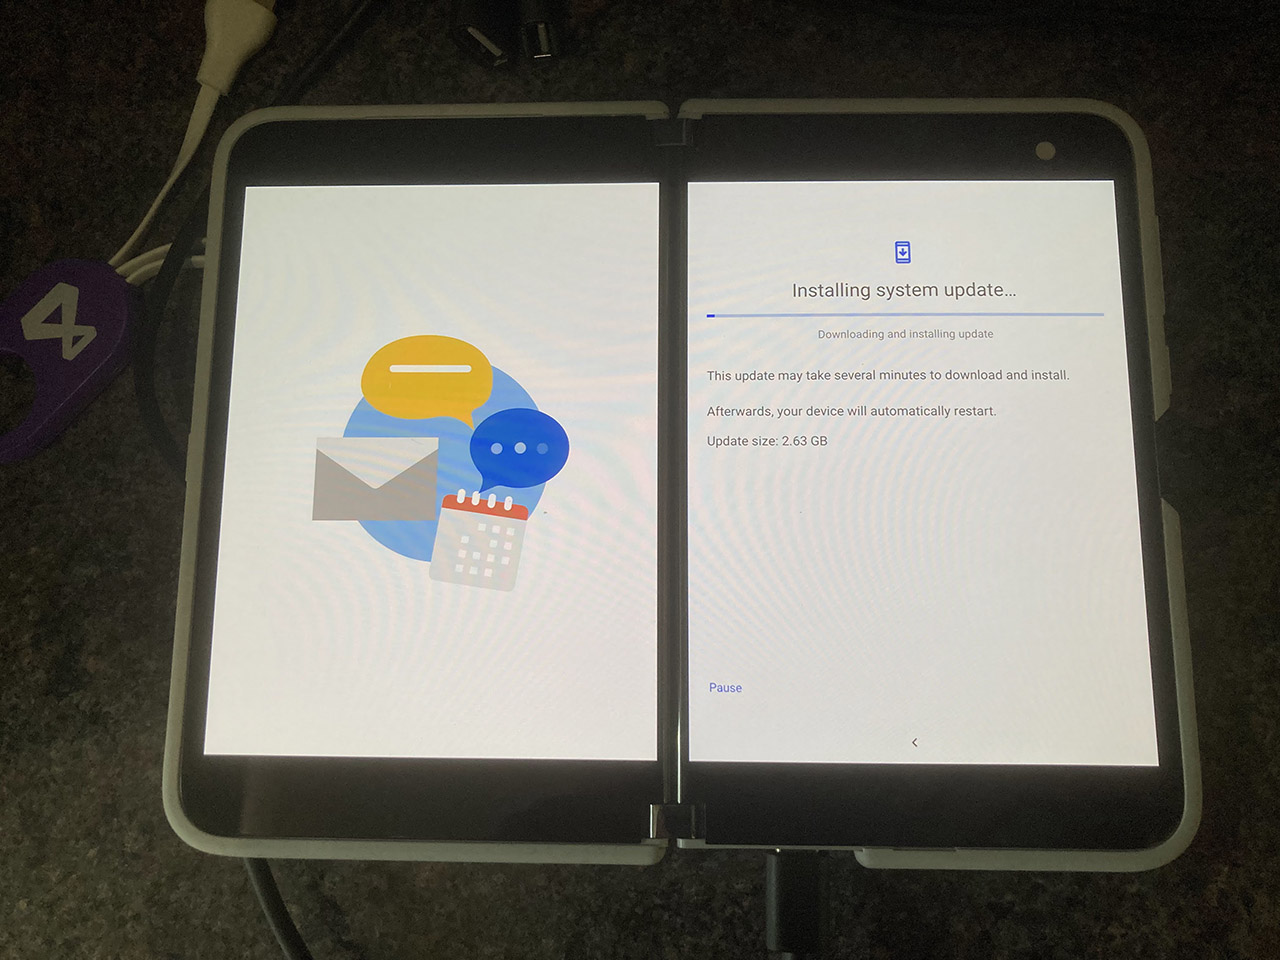 Microsoft Surface Duo - Installing System Update